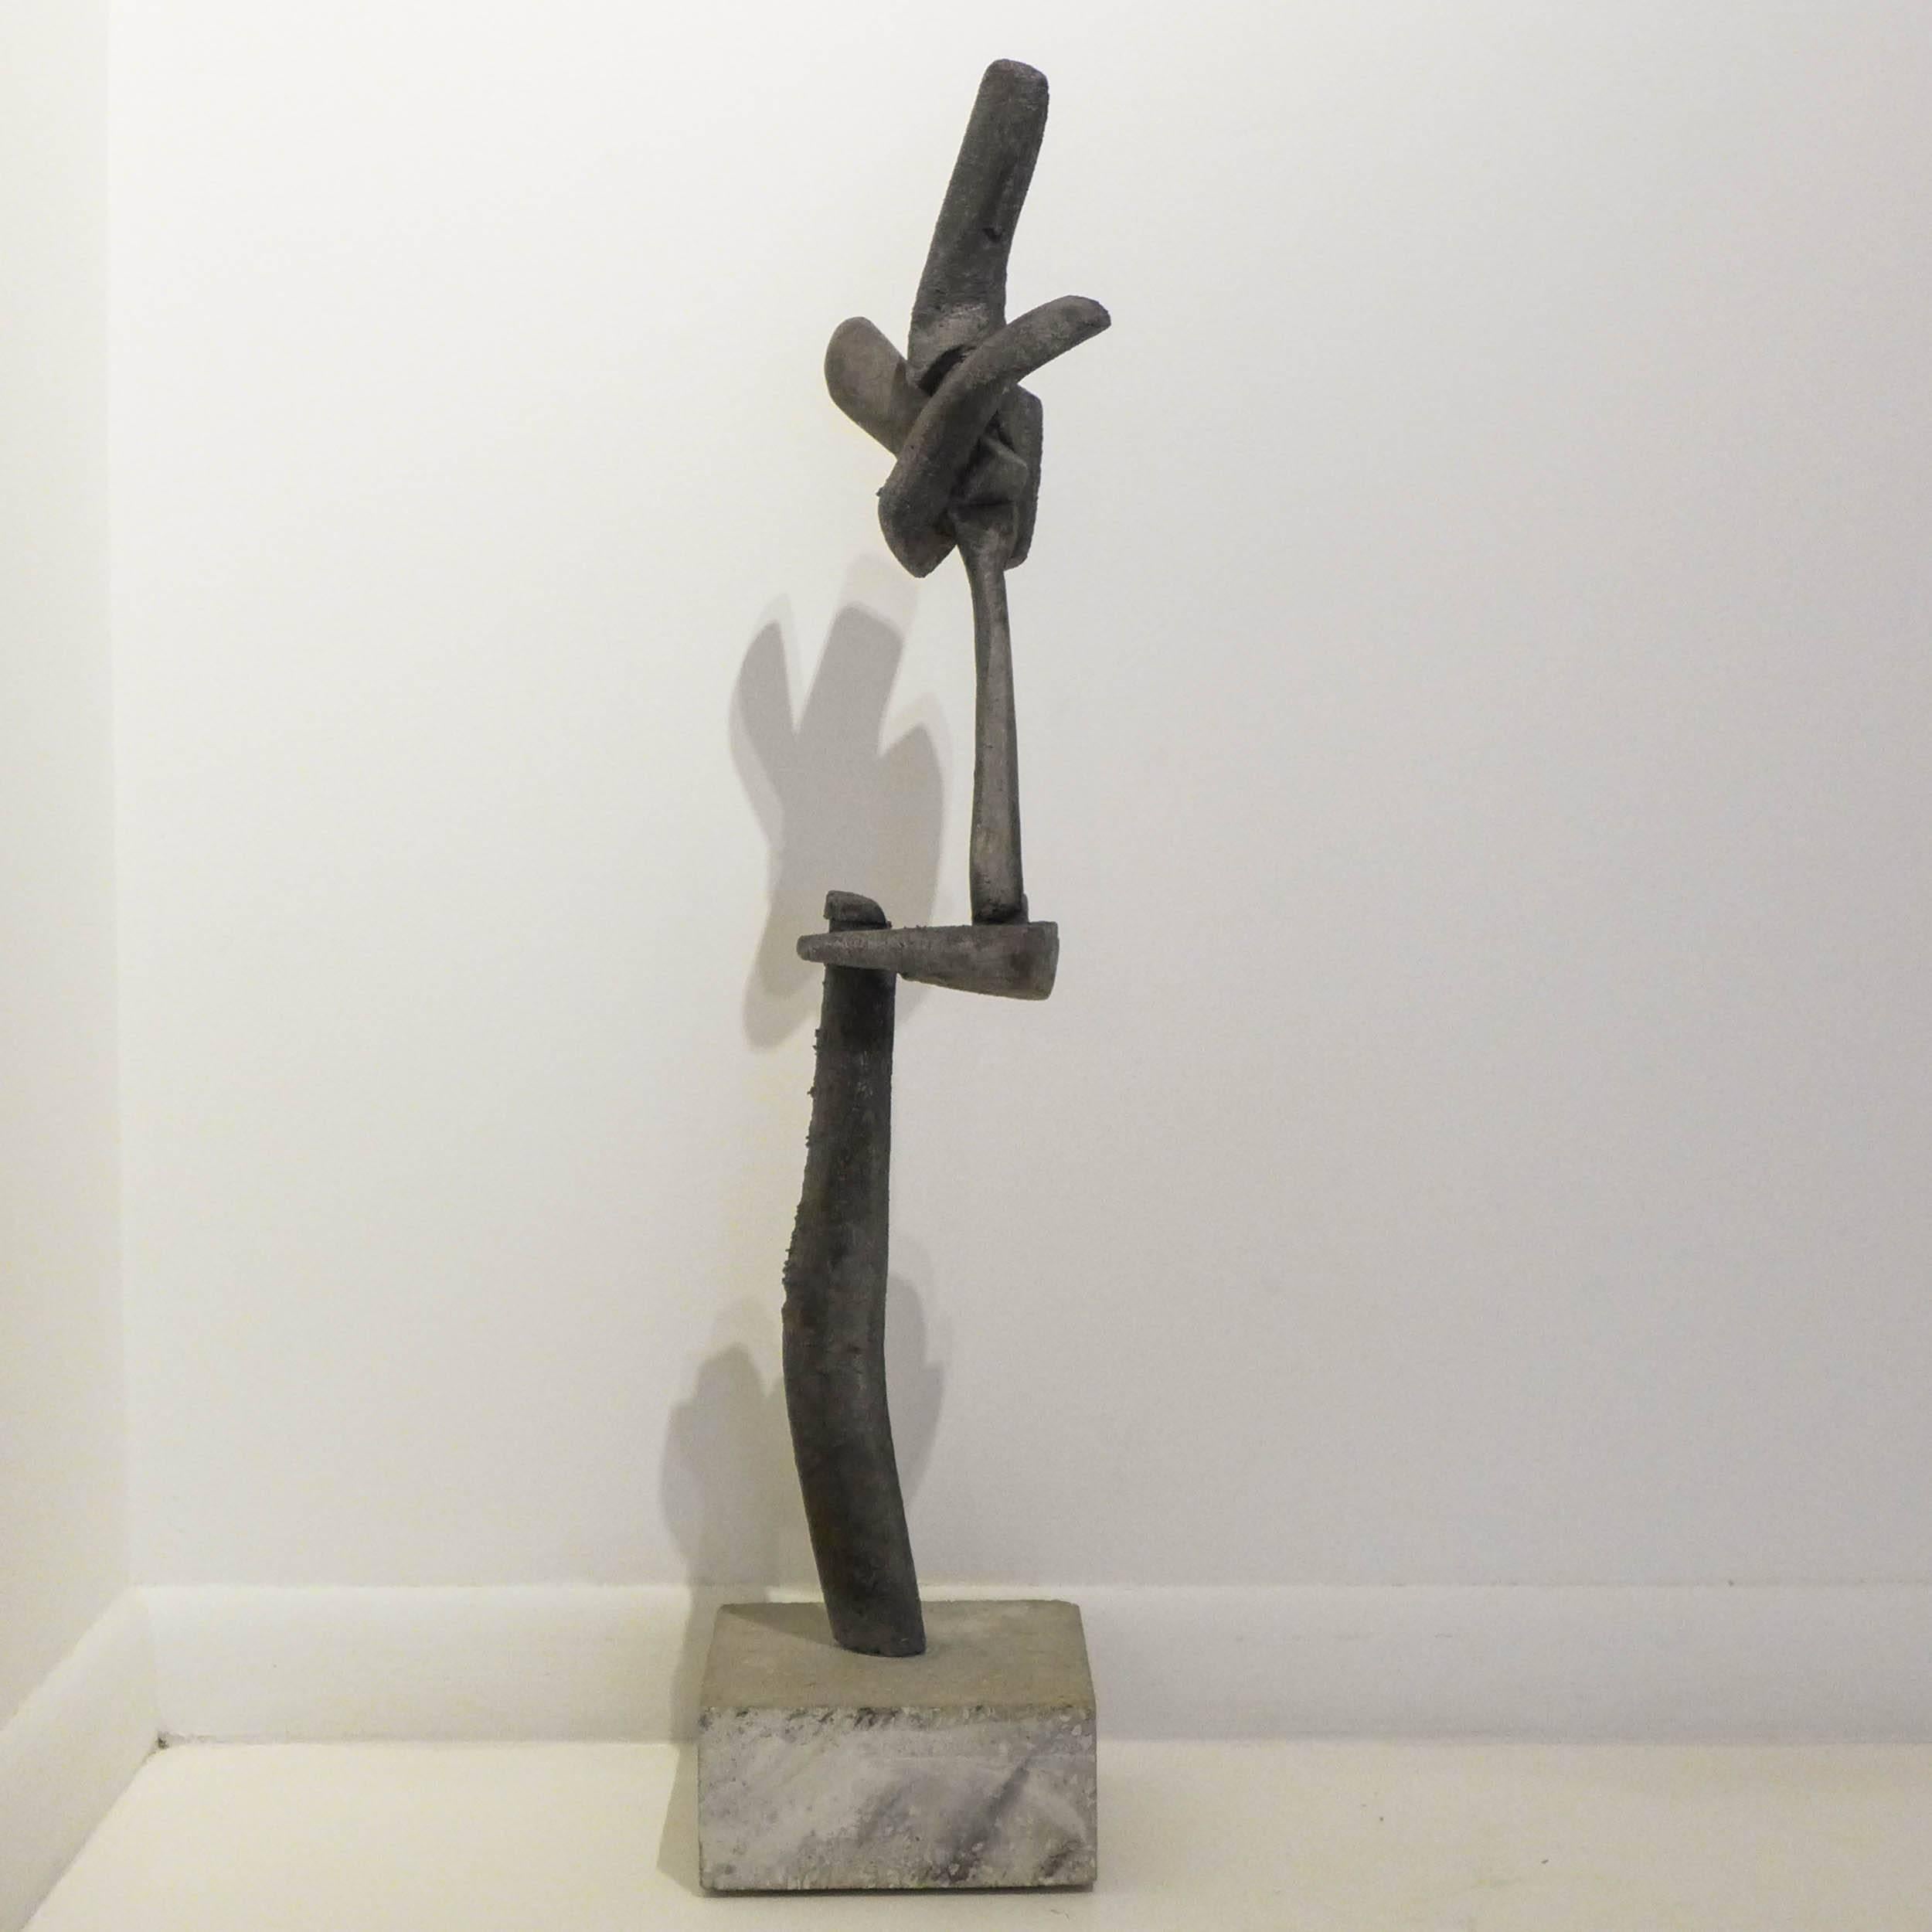 Slender, Brutalist abstract sculpture made of cast and joined aluminum on a cement base. By Kansas City artist and furniture maker Gene Caples (1911-1989). Caples studied at Cranbrook with Julius Schmidt, earning an MFA in 1965. Signed and dated